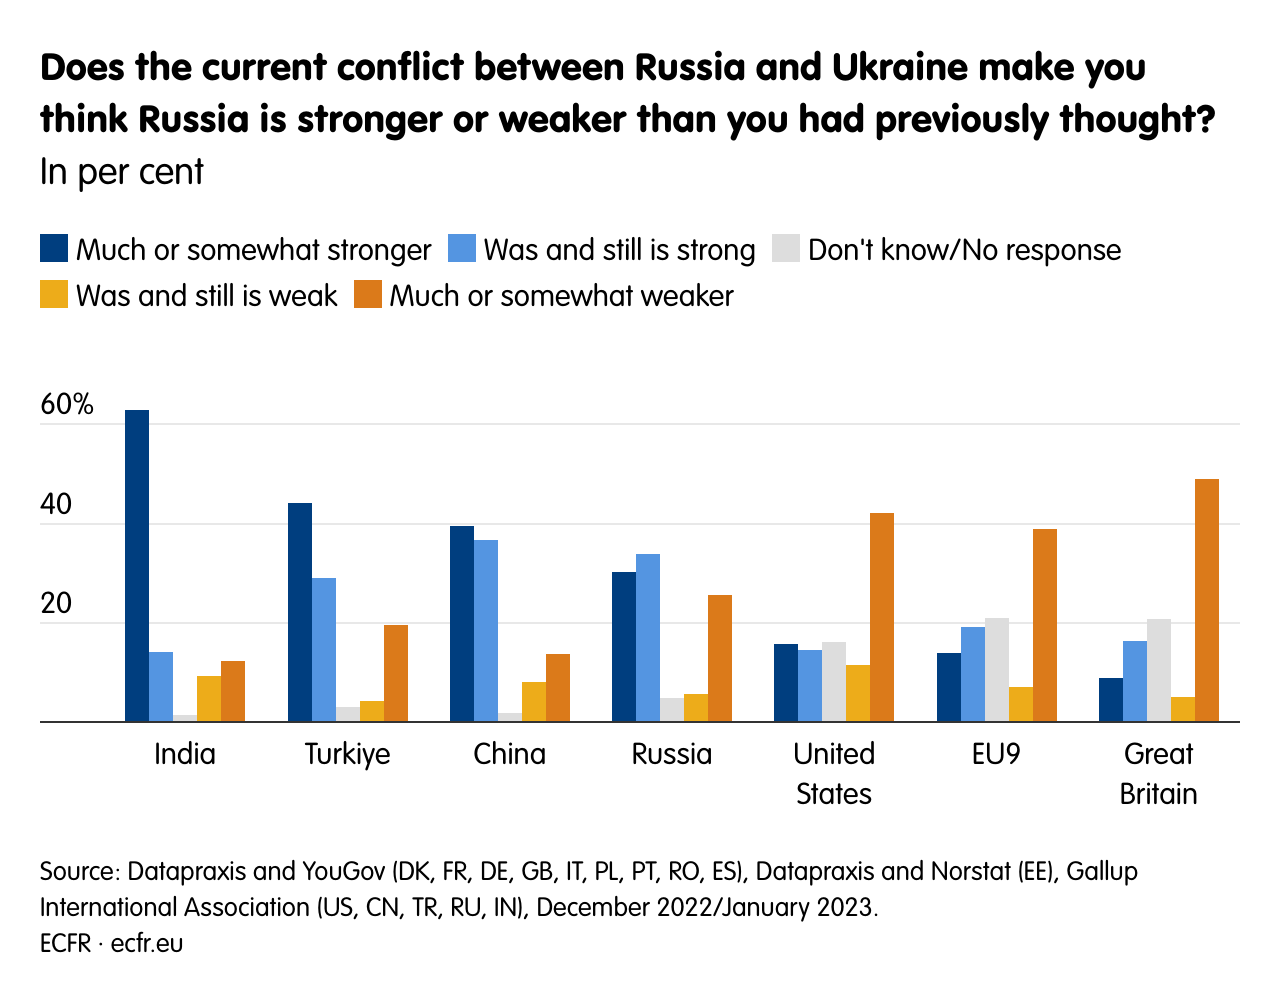 Does the current conflict between Russia and Ukraine make you think Russia is stronger or weaker than you had previously thought?